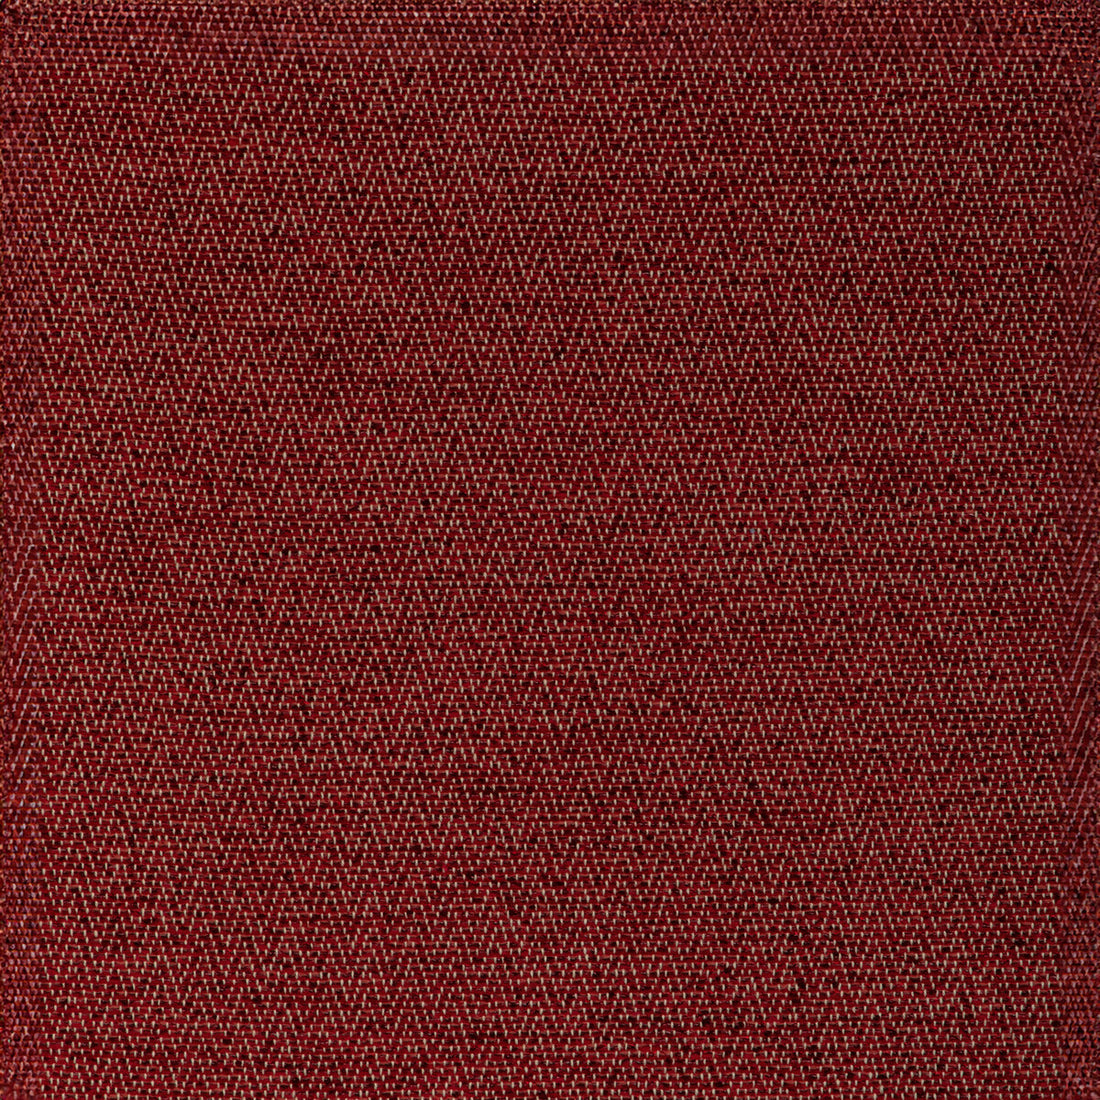 Beauvoir Texture fabric in red color - pattern 8023153.19.0 - by Brunschwig &amp; Fils in the Chambery Textures IV collection